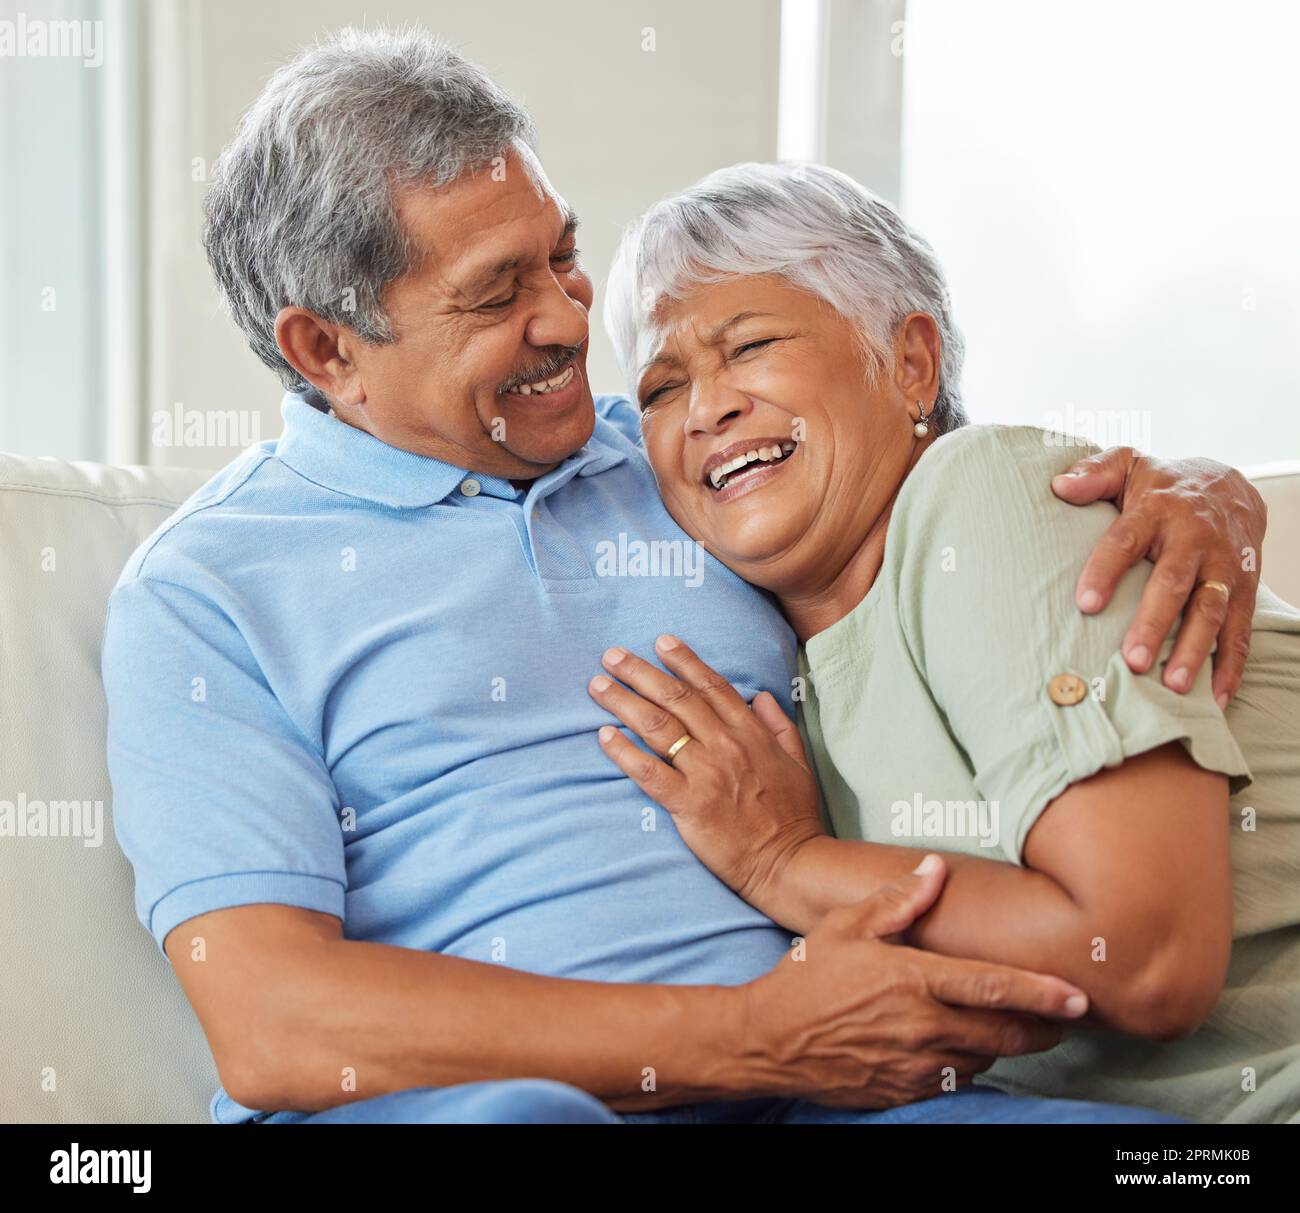 Love, care and happy senior couple hugging each other while bonding and relaxing on sofa at home. Elderly man and woman sitting on a couch in the living room while embracing, talking and laughing. Stock Photo